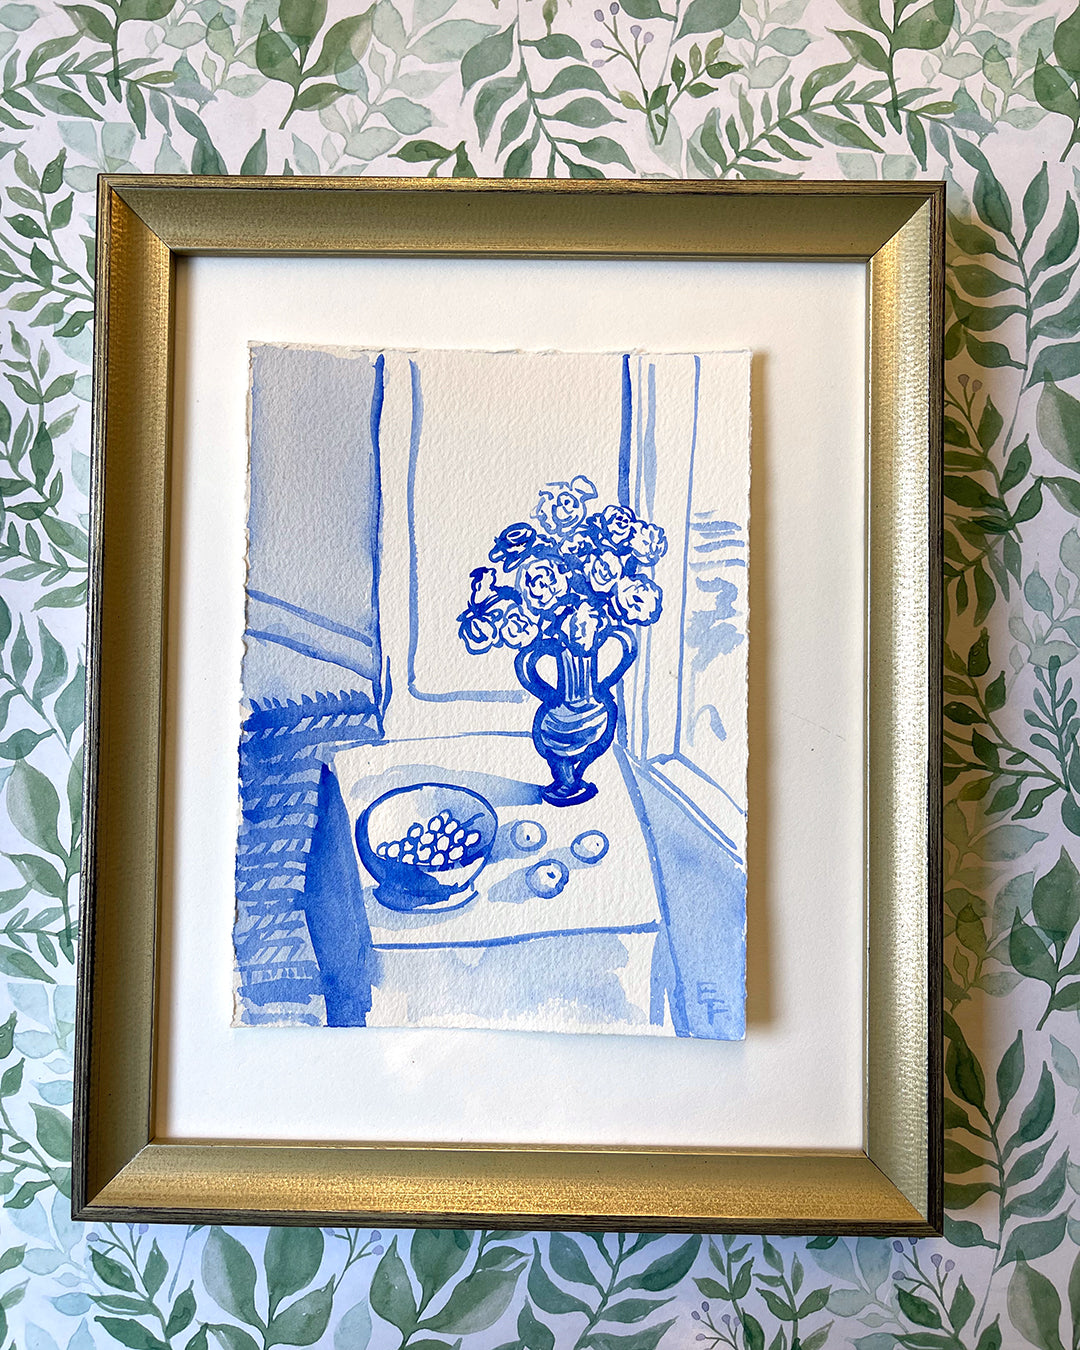 ROSES AT THE WINDOW, BLUE AND WHITE WATERCOLOR, UNFRAMED